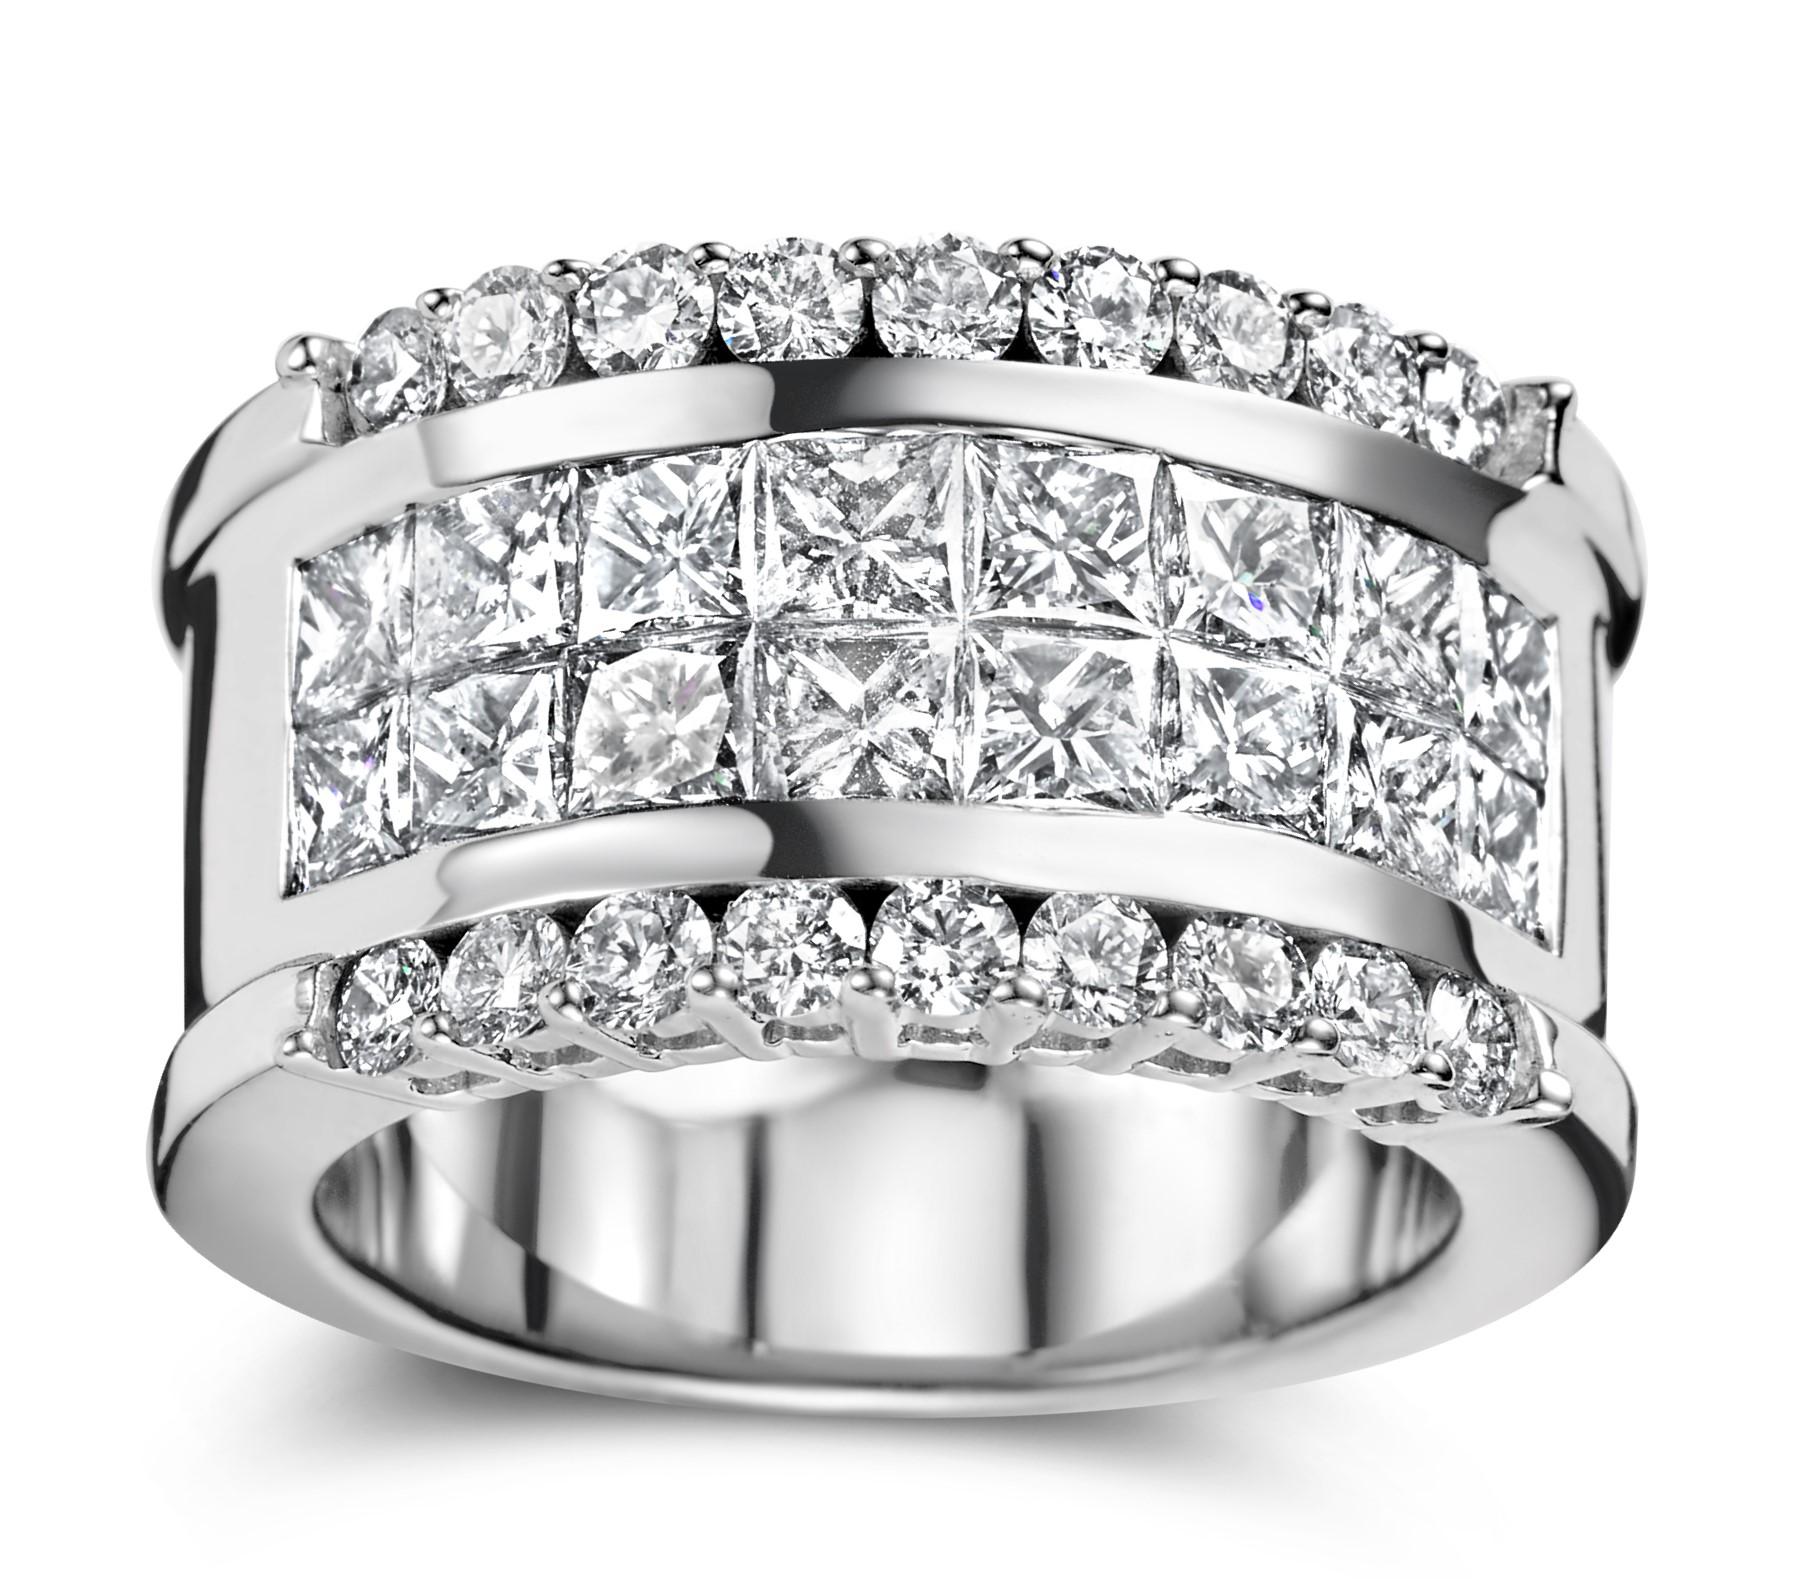 18kt White Gold Ring With 2.5 ct Princess cut & 1 ct Brilliant cut Diamonds

Diamonds: 16 Princess cut diamonds ( 2.5 Ct.) , 18 brilliant cut diamonds (1 Ct) Top Quality!
Colour: D/E . Clarity : Internally Flawless Flawless/VVS

One of  a kind solid